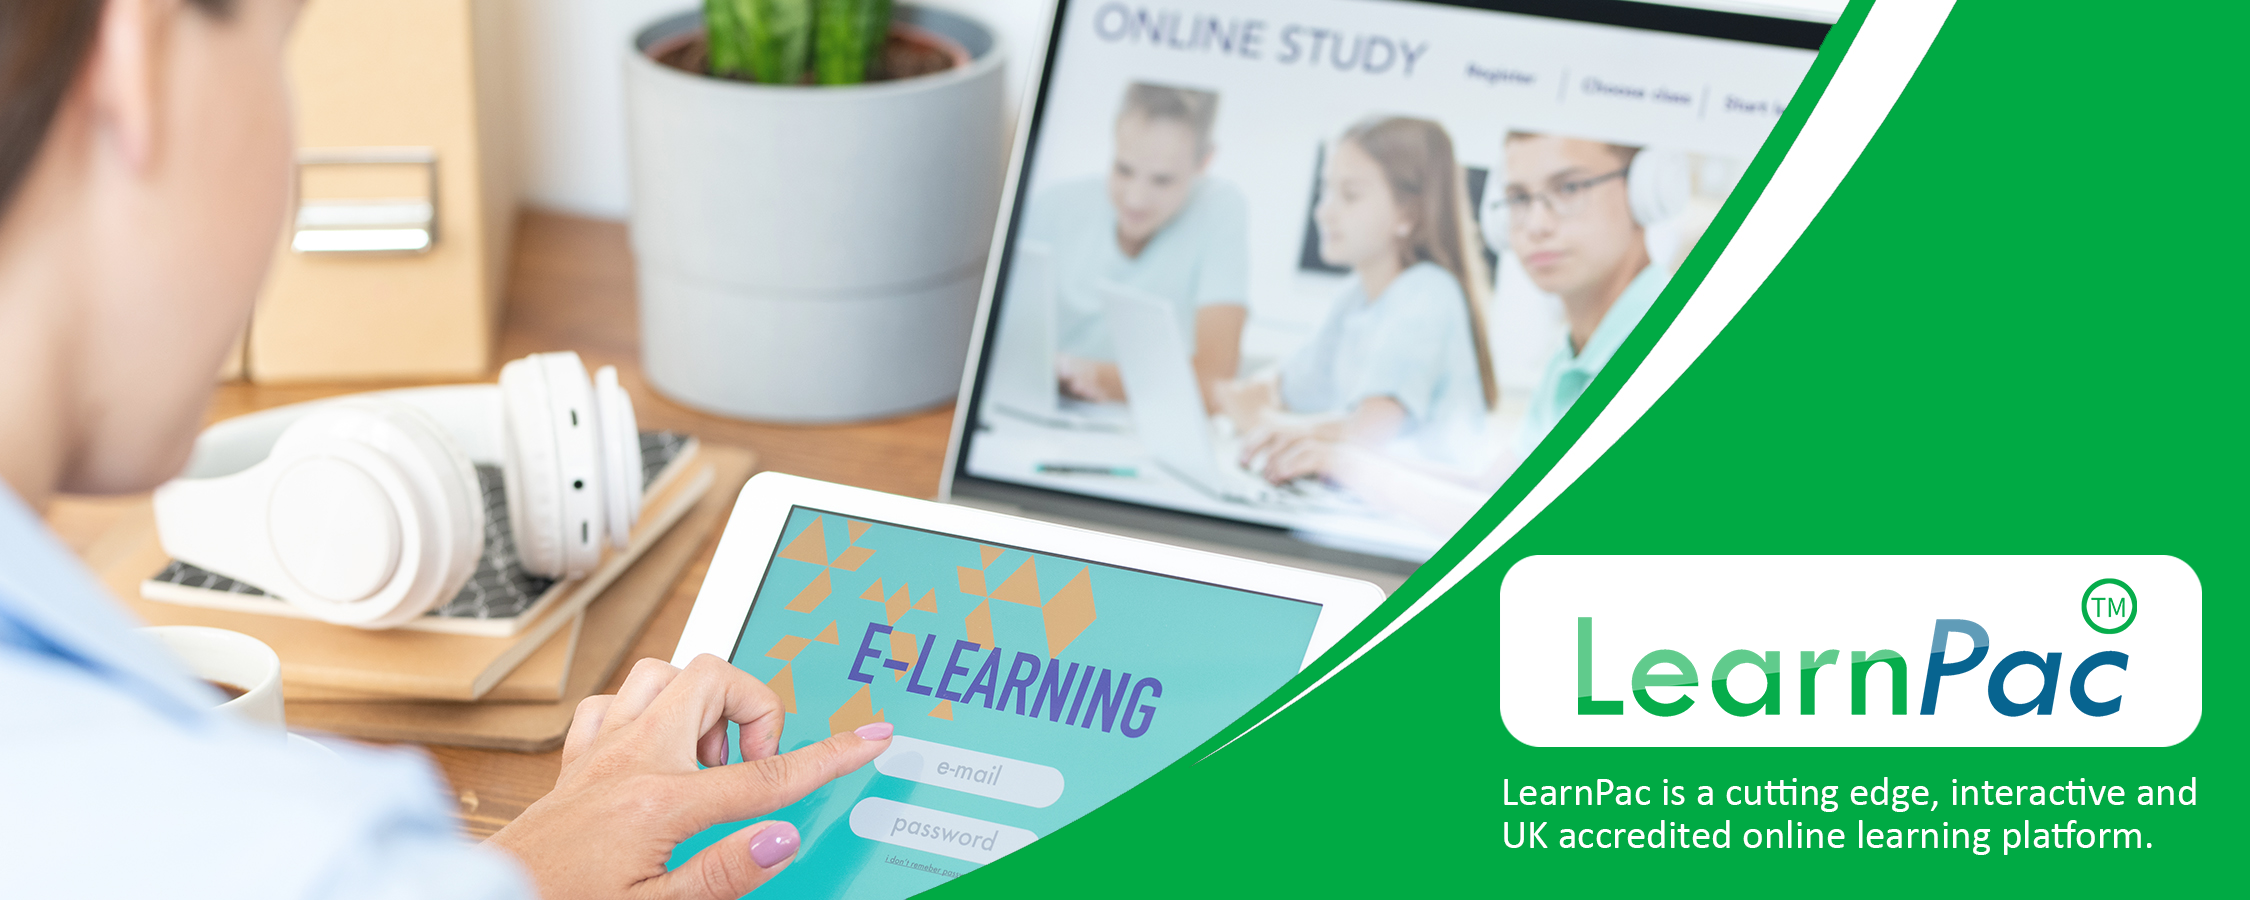 Universal Safety Practices Training - Online Learning Courses - E-Learning Courses - LearnPac Systems UK -